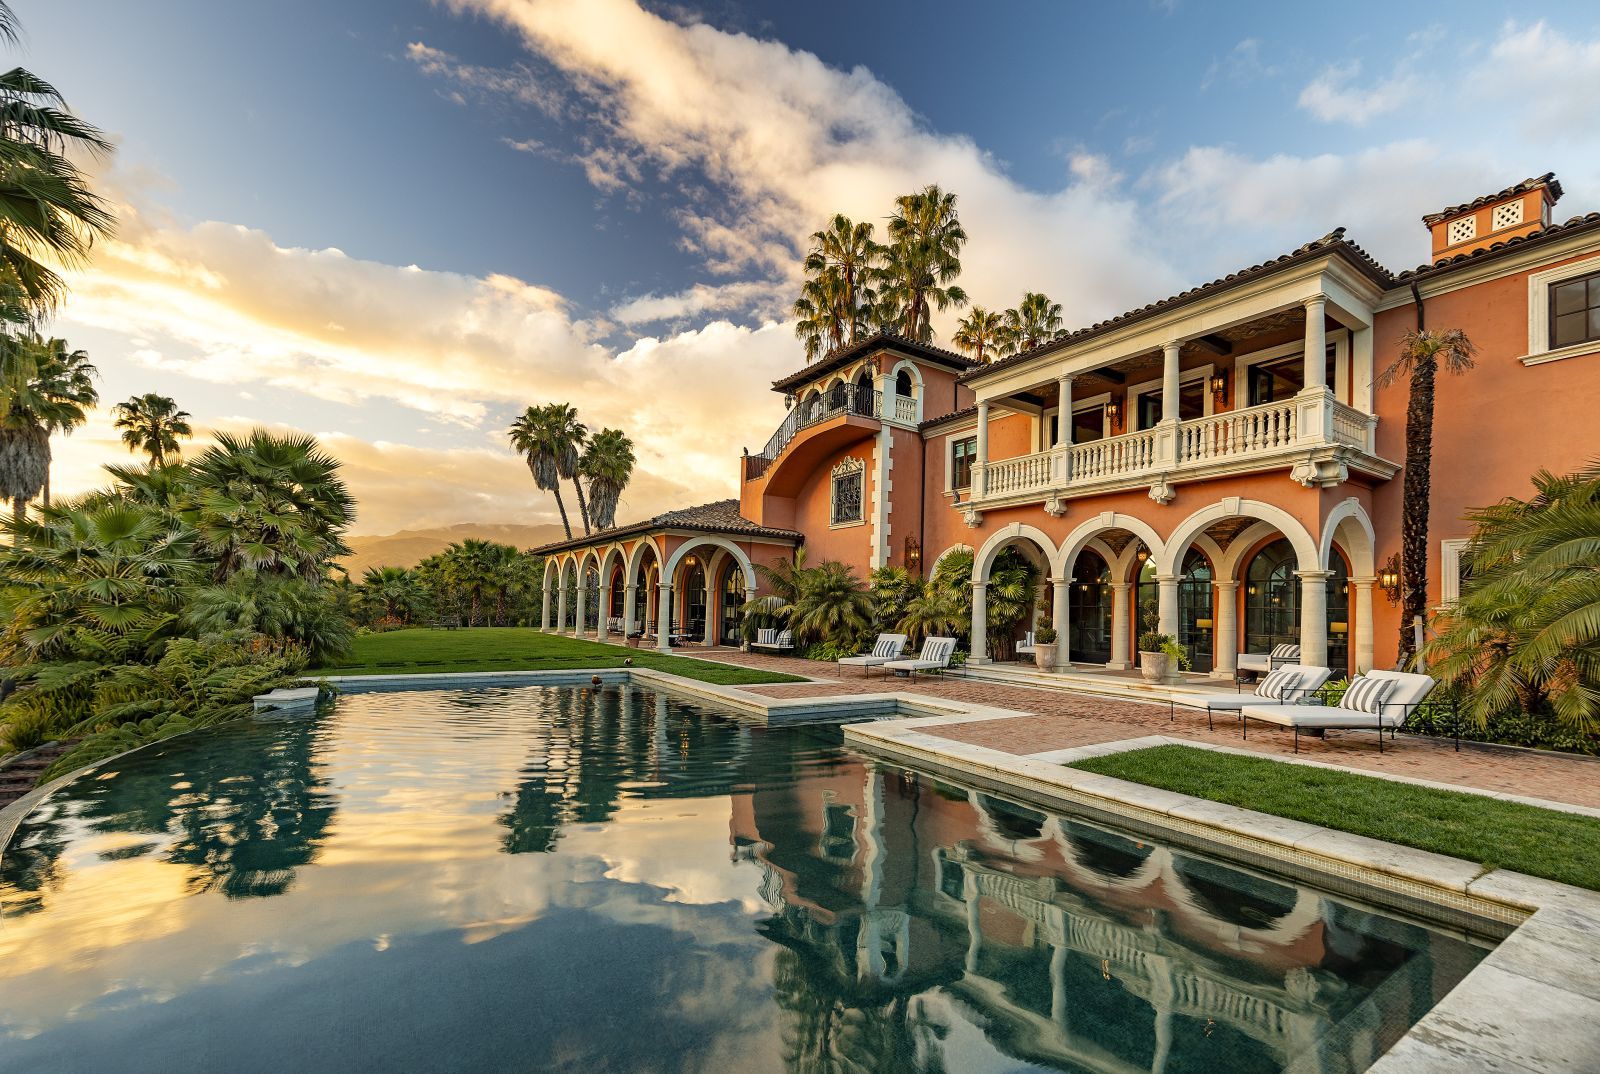 A world-class Hacienda-style Spanish Colonial estate with a serene pool in the foreground and fluffy clouds on a blue sky in the background.